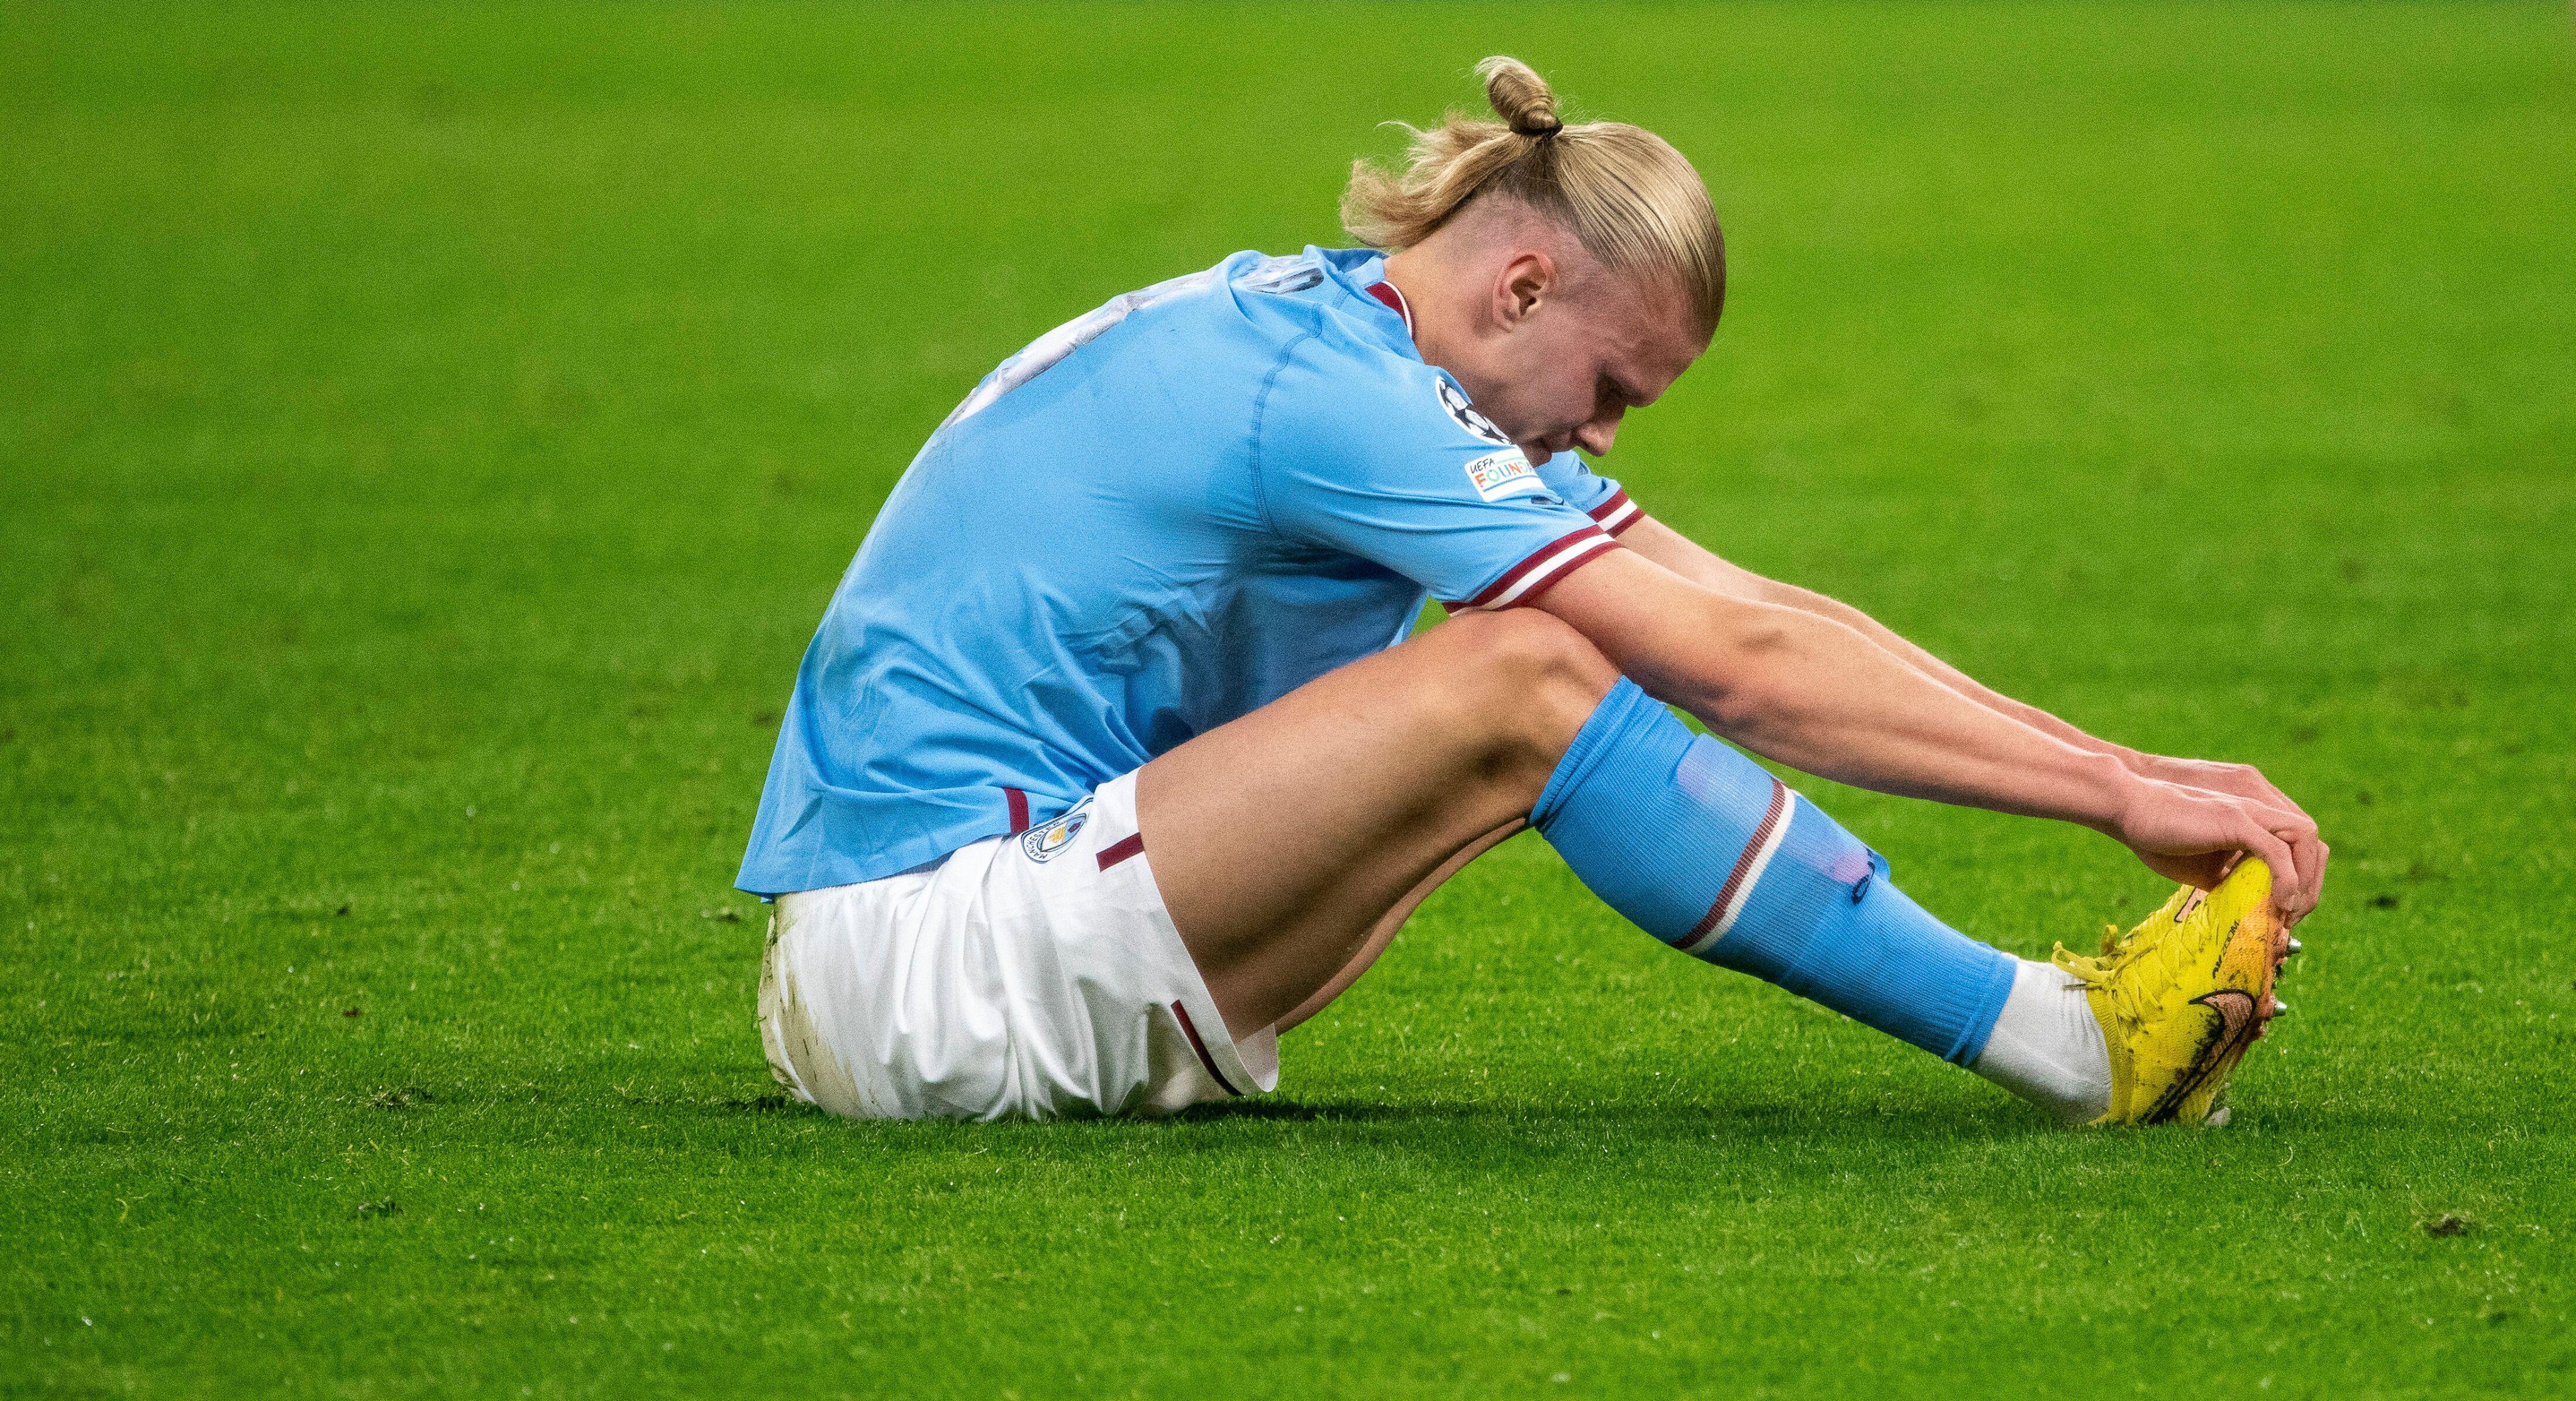 Premier League: Pep Guardiola provides update on Erling Haaland's injury, CONFIRMS date of return - Check out